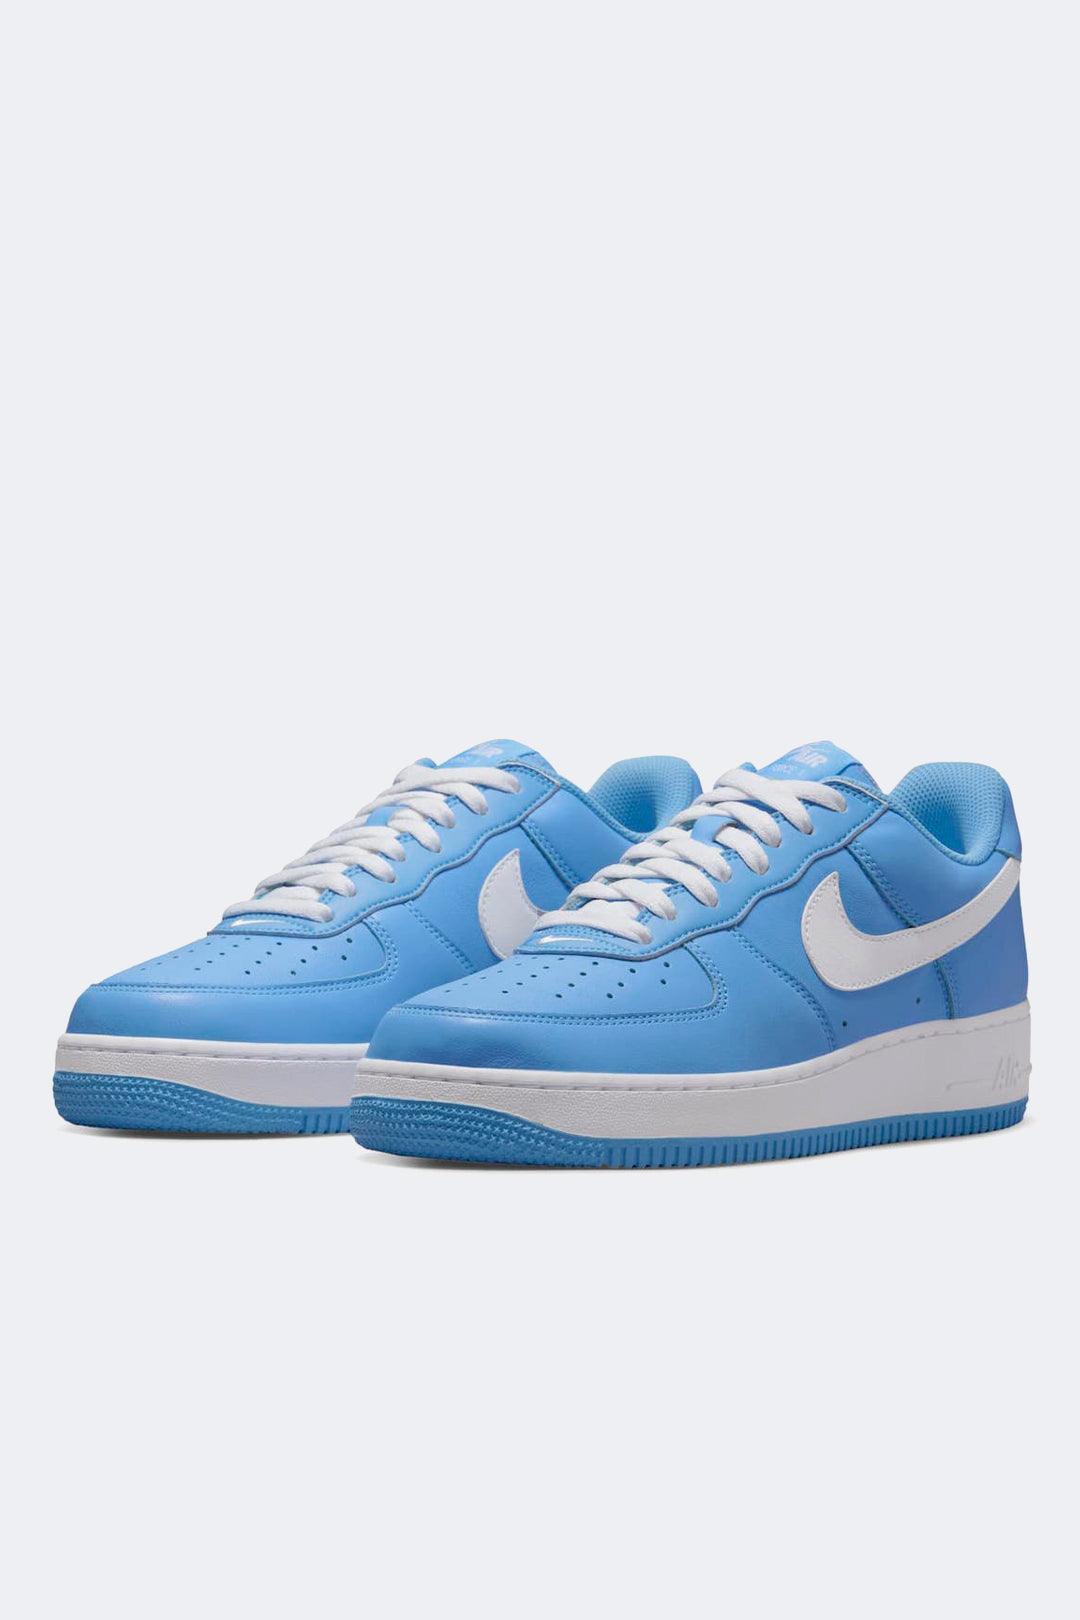 NIKE AIR FORCE 1 LOW SINCE 82 UNC - HYPE